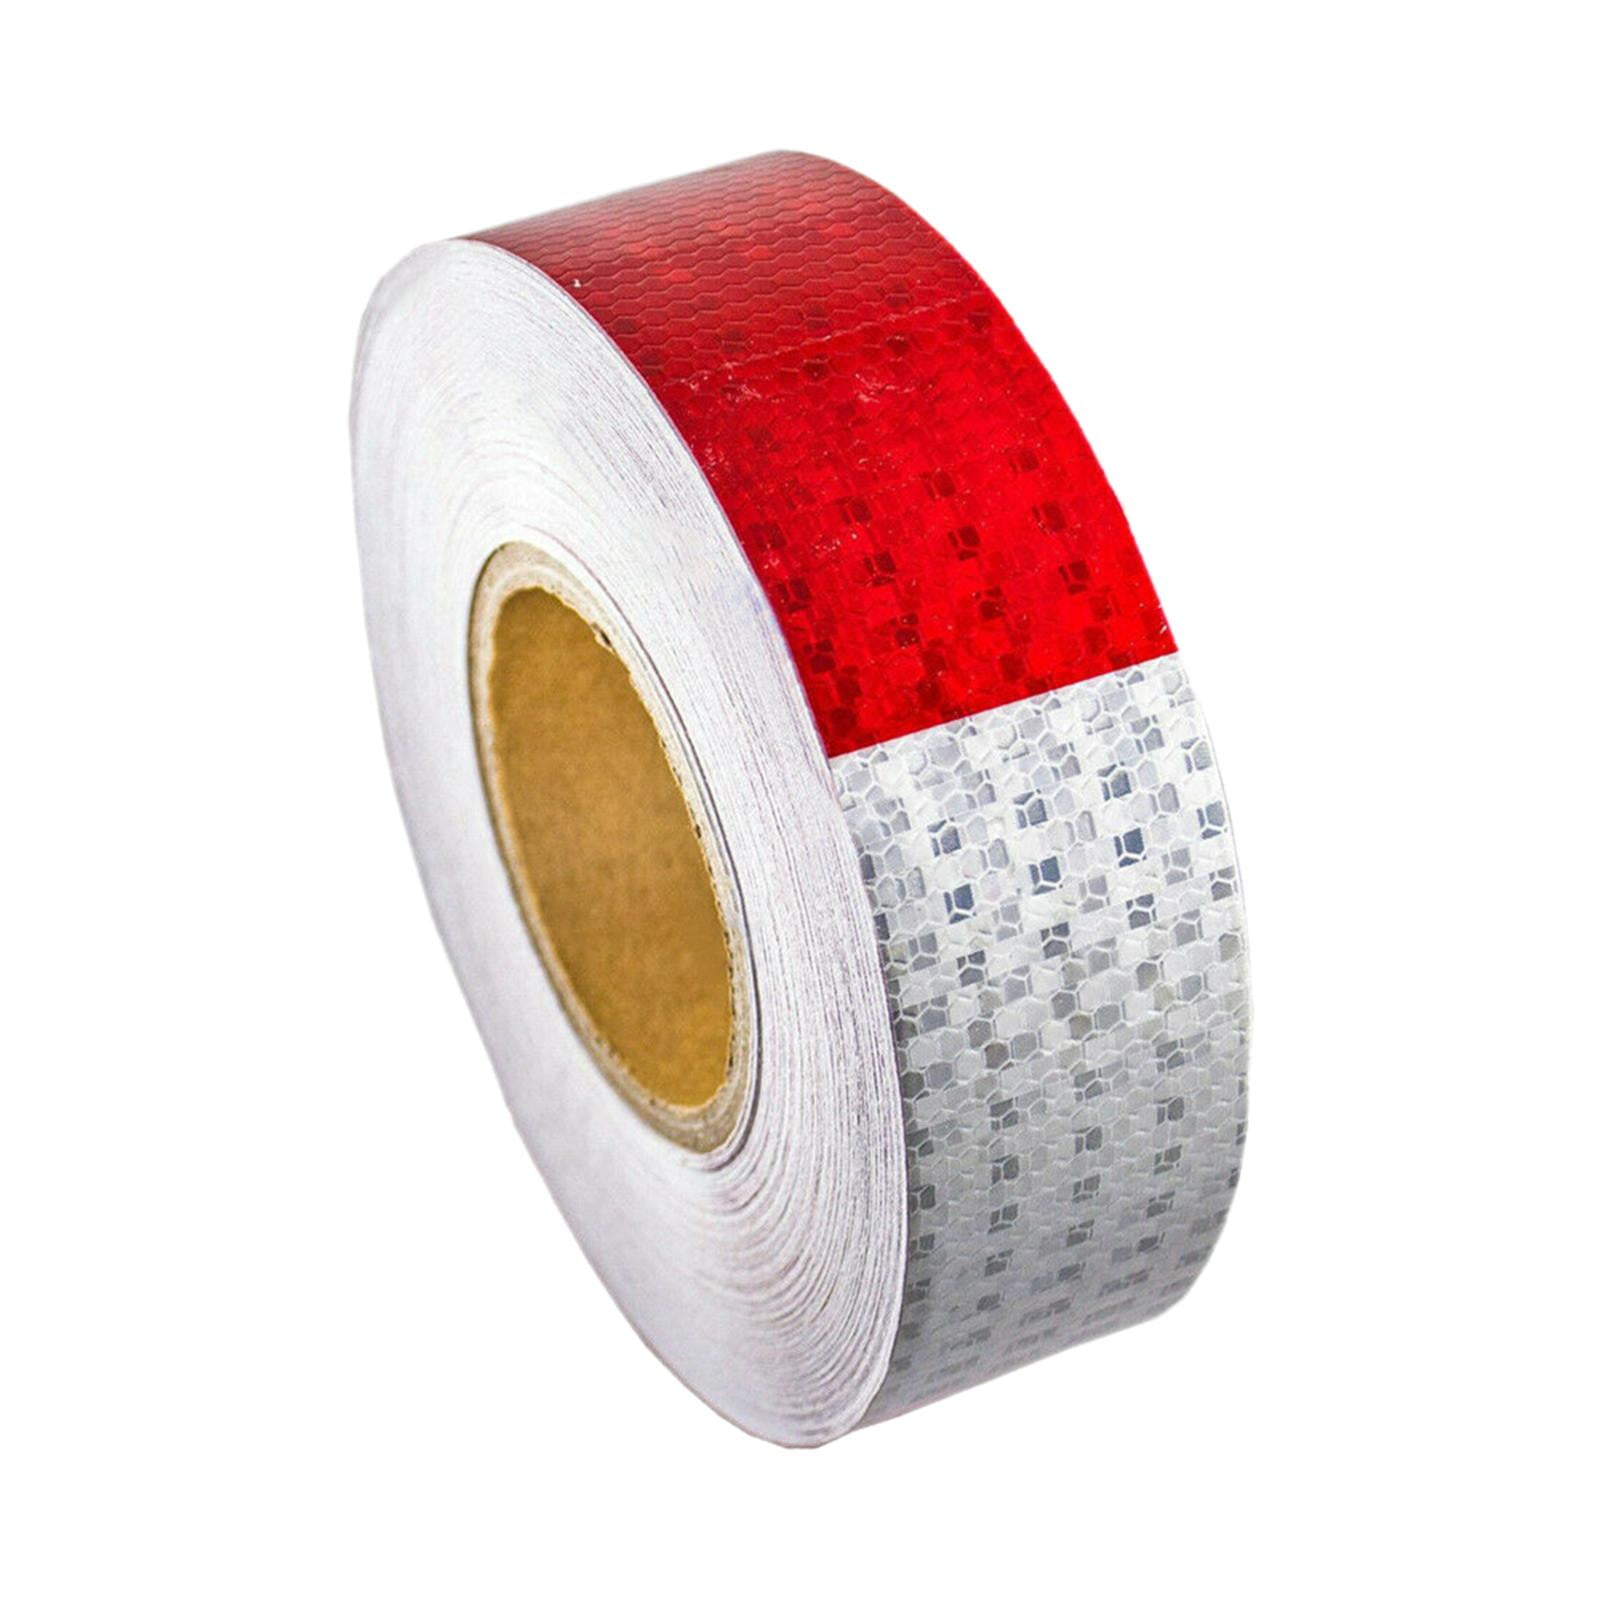 DOT-C2 Conspicuity Reflective Tape 2 Inch X 150 Feet Red 2x150 red 